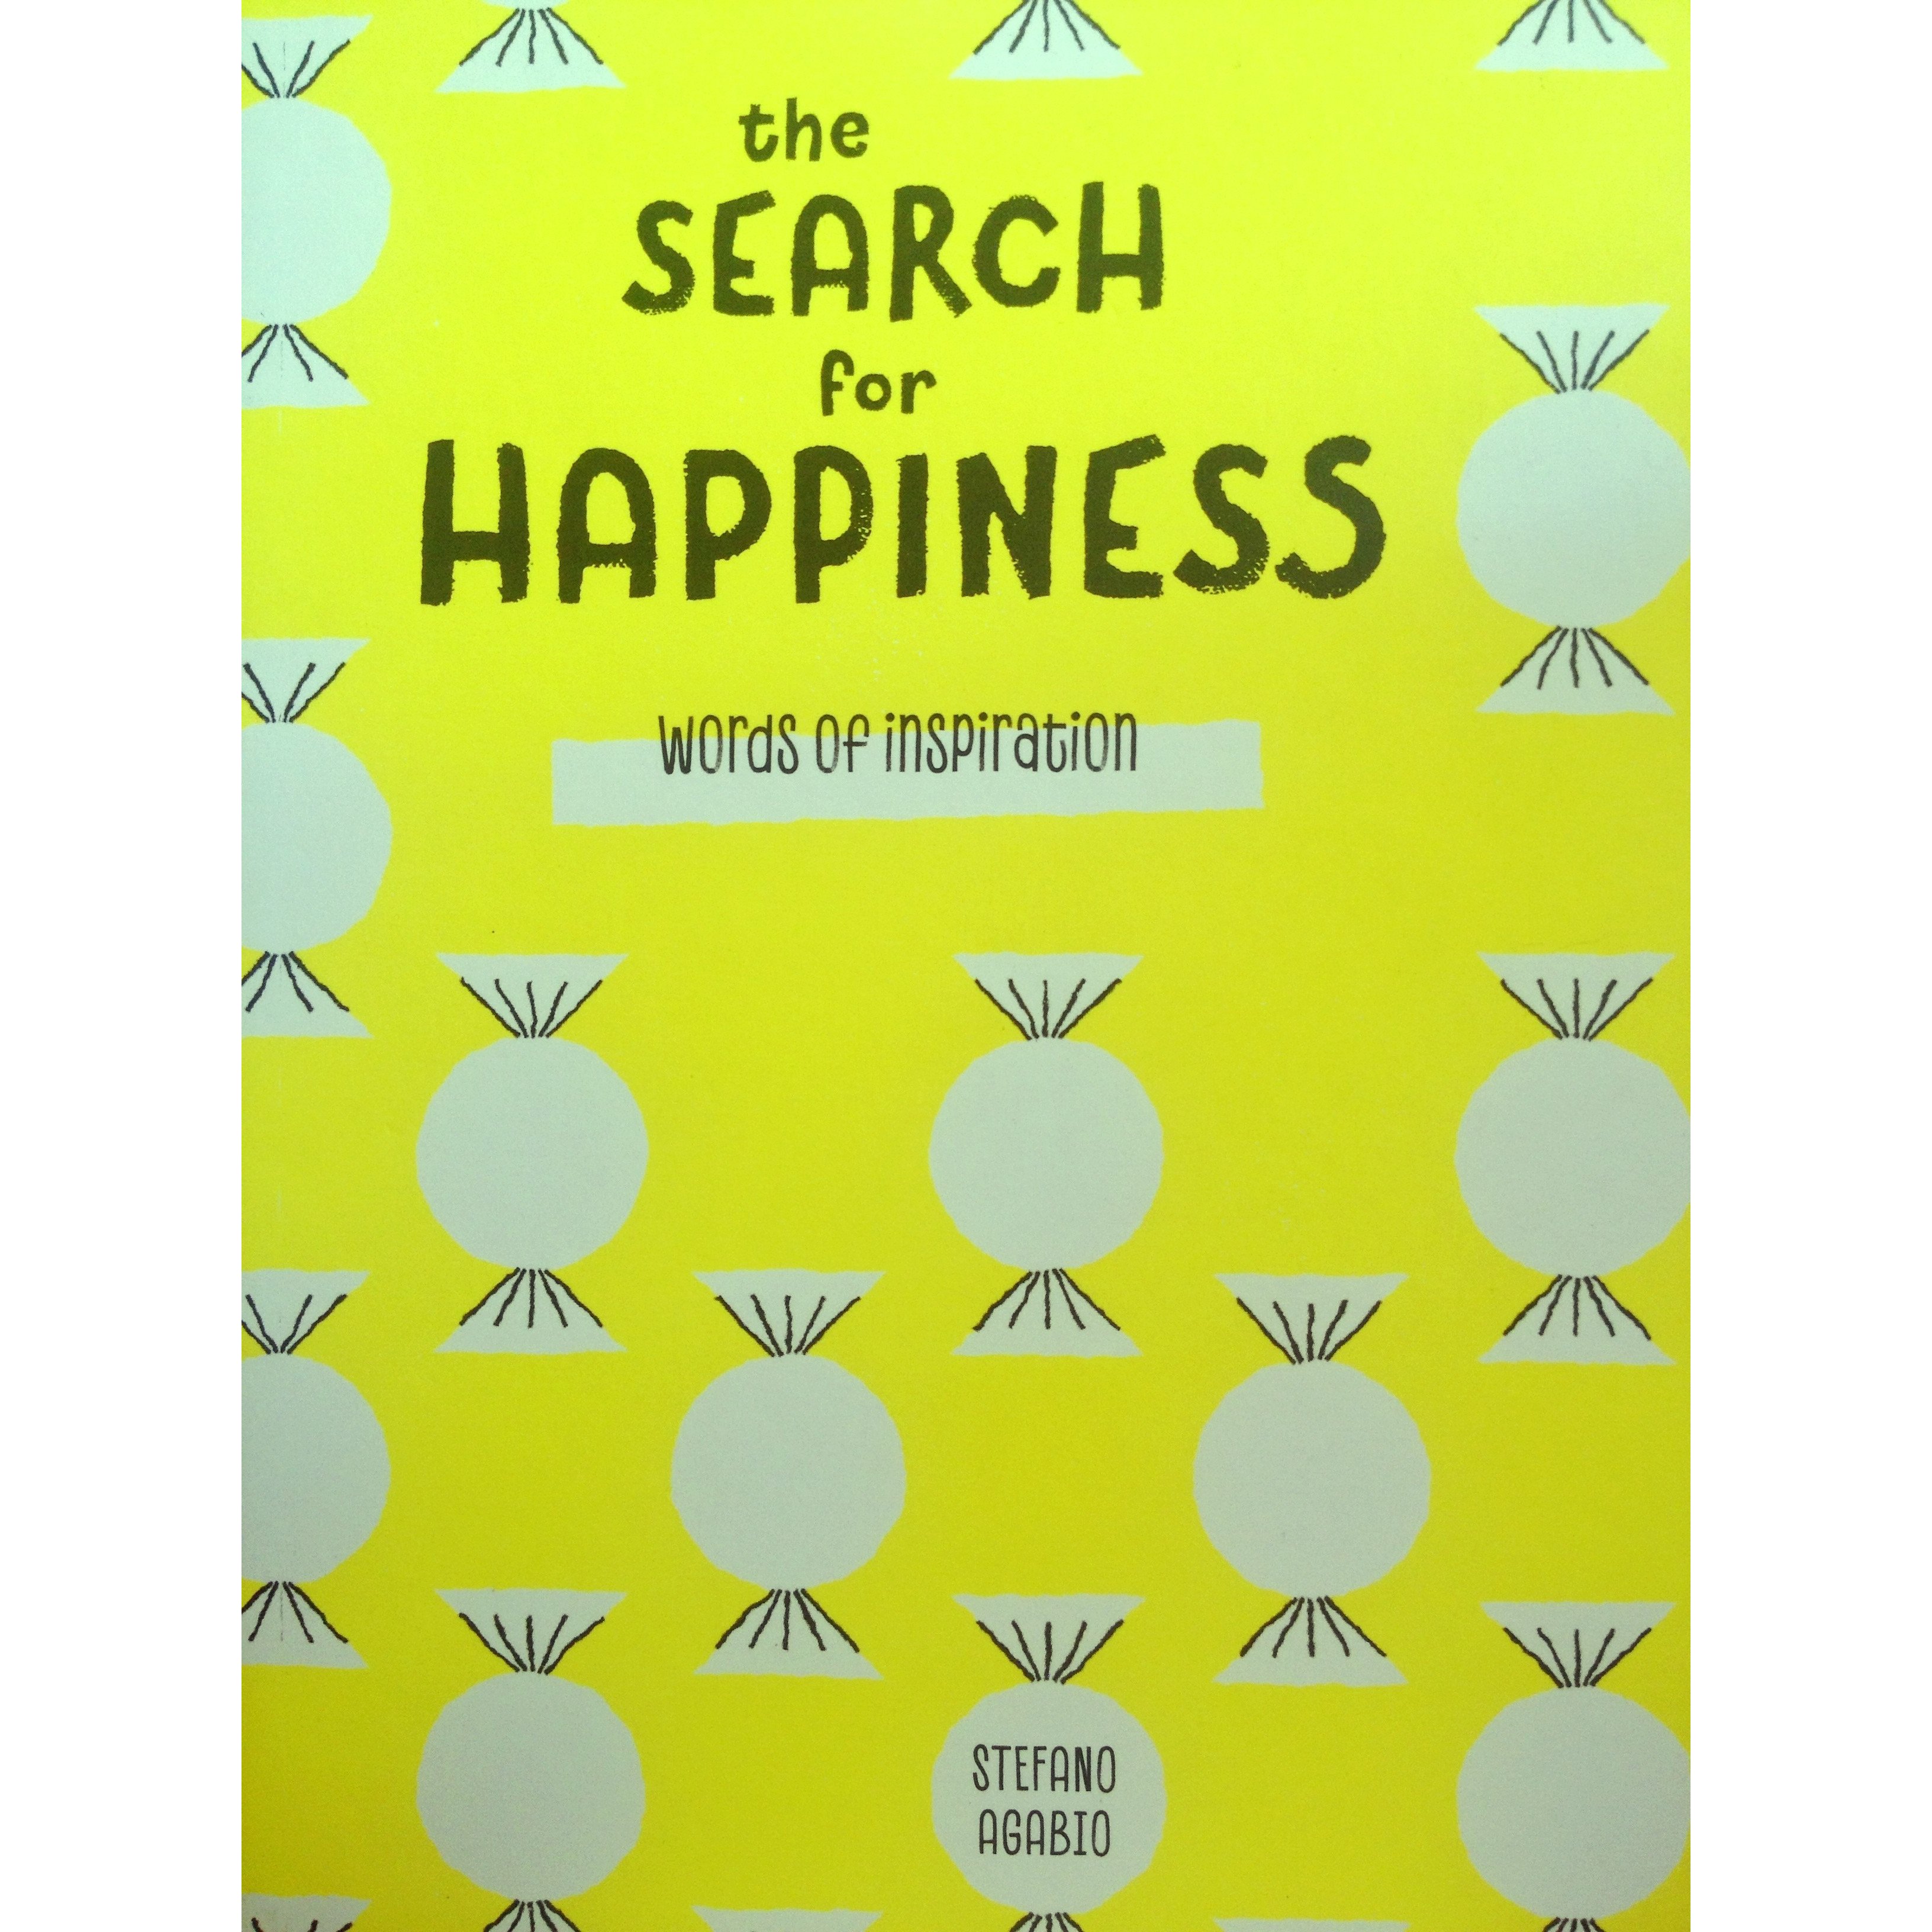 Words of Inspiration: The Search for Happiness